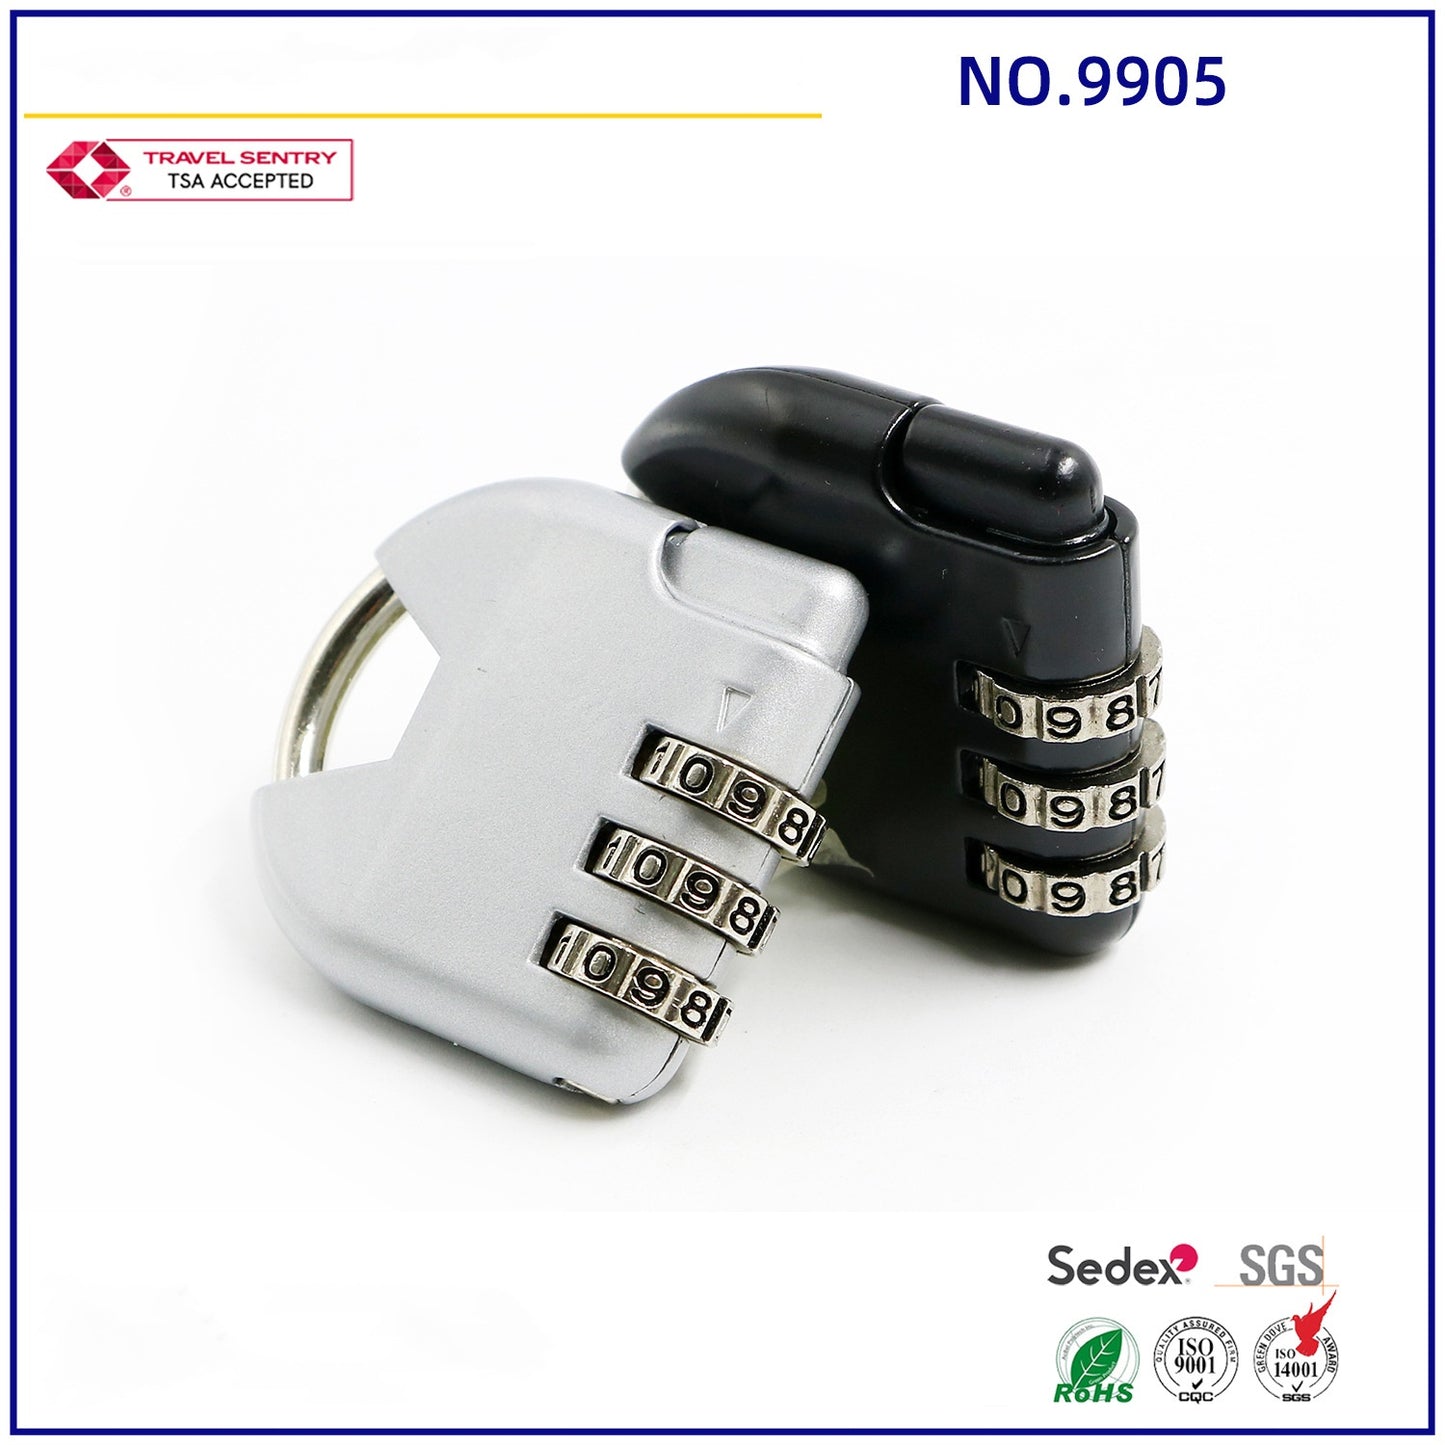 Hot selling exquisite mini suitcase padlock with 3-digit password zinc alloy cute safety password padlock-3